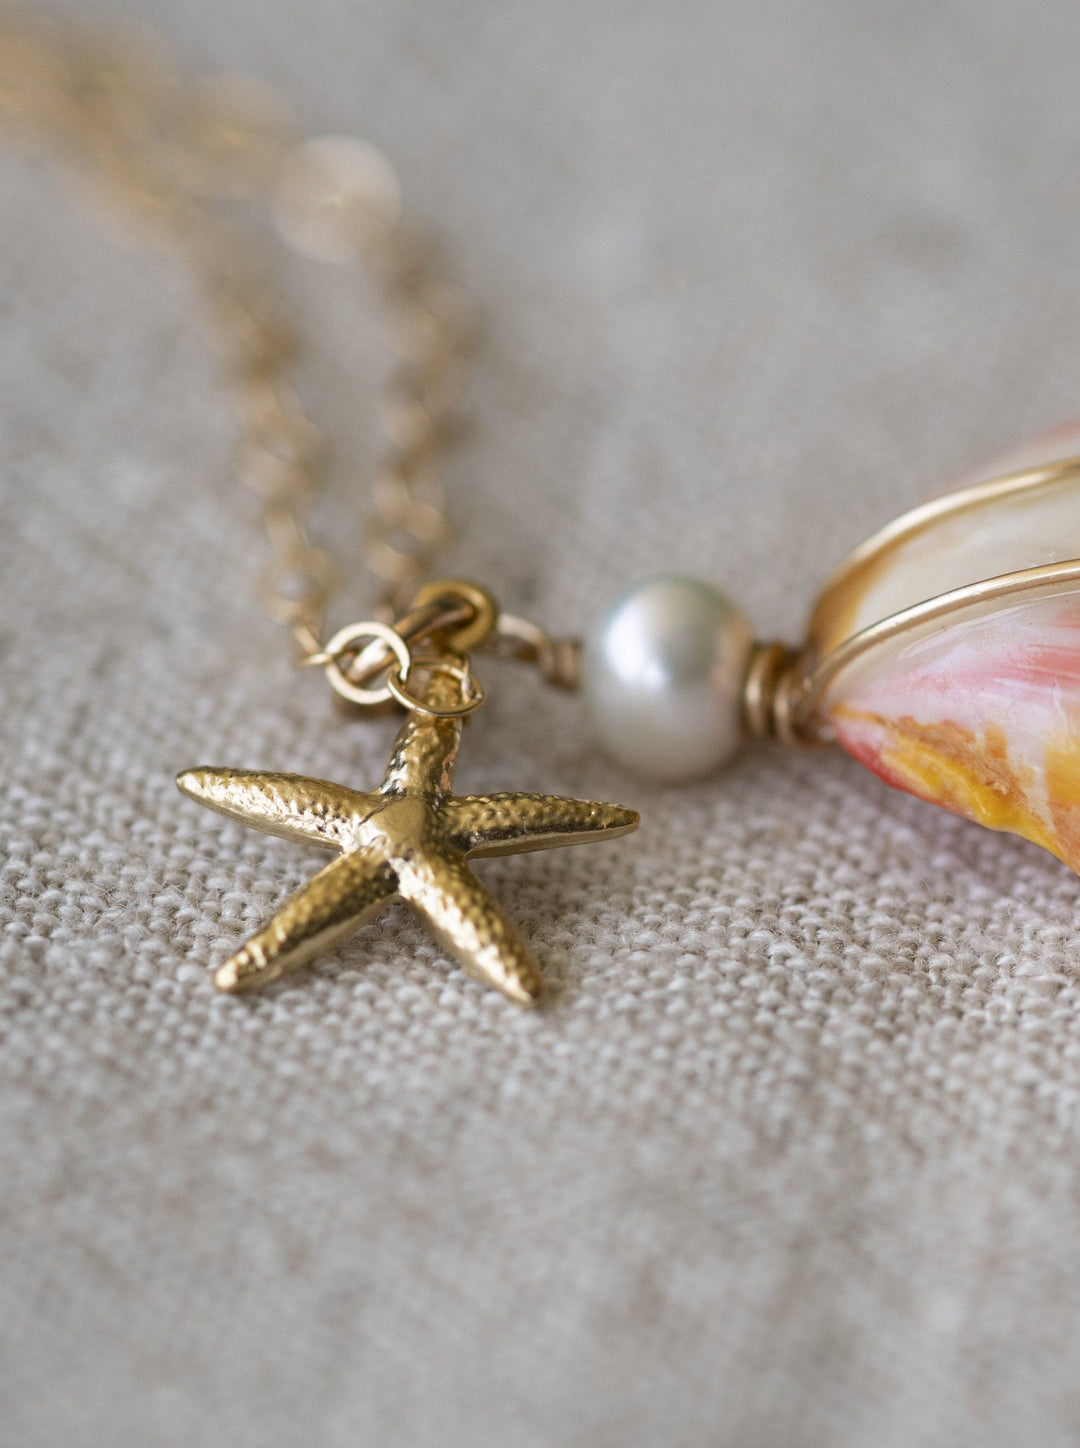 HI BARBARA ONEKEA MADE IN HAWAII NECKLACE Hawaiian Sunrise Shell with Fresh Water Pearls and Starfish Charm necklace 14 KT Gold filled